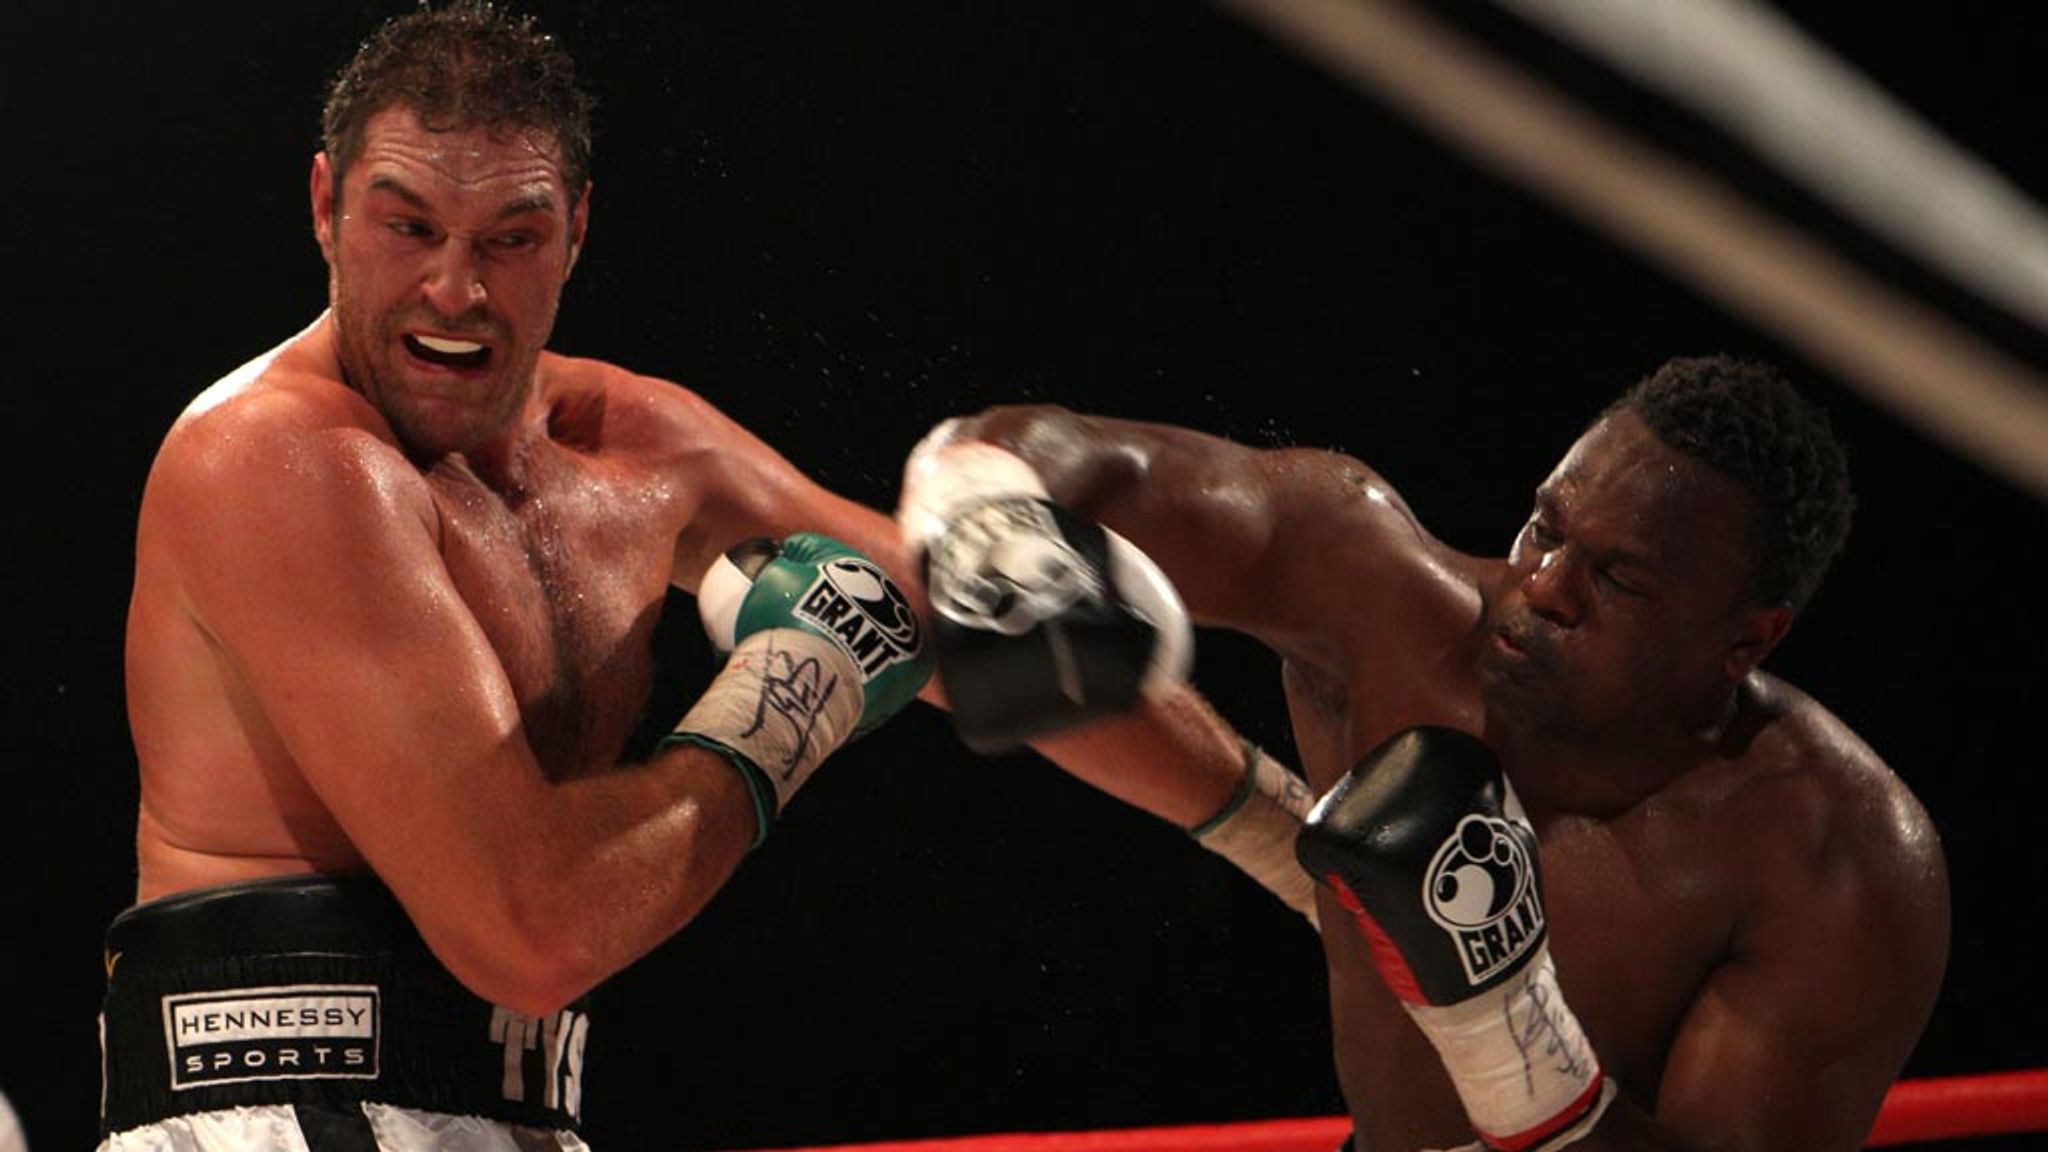 Tyson Fury vs Derek Chisora 3: Who Is the Better Knockout Artist Between Fury and Chisora?